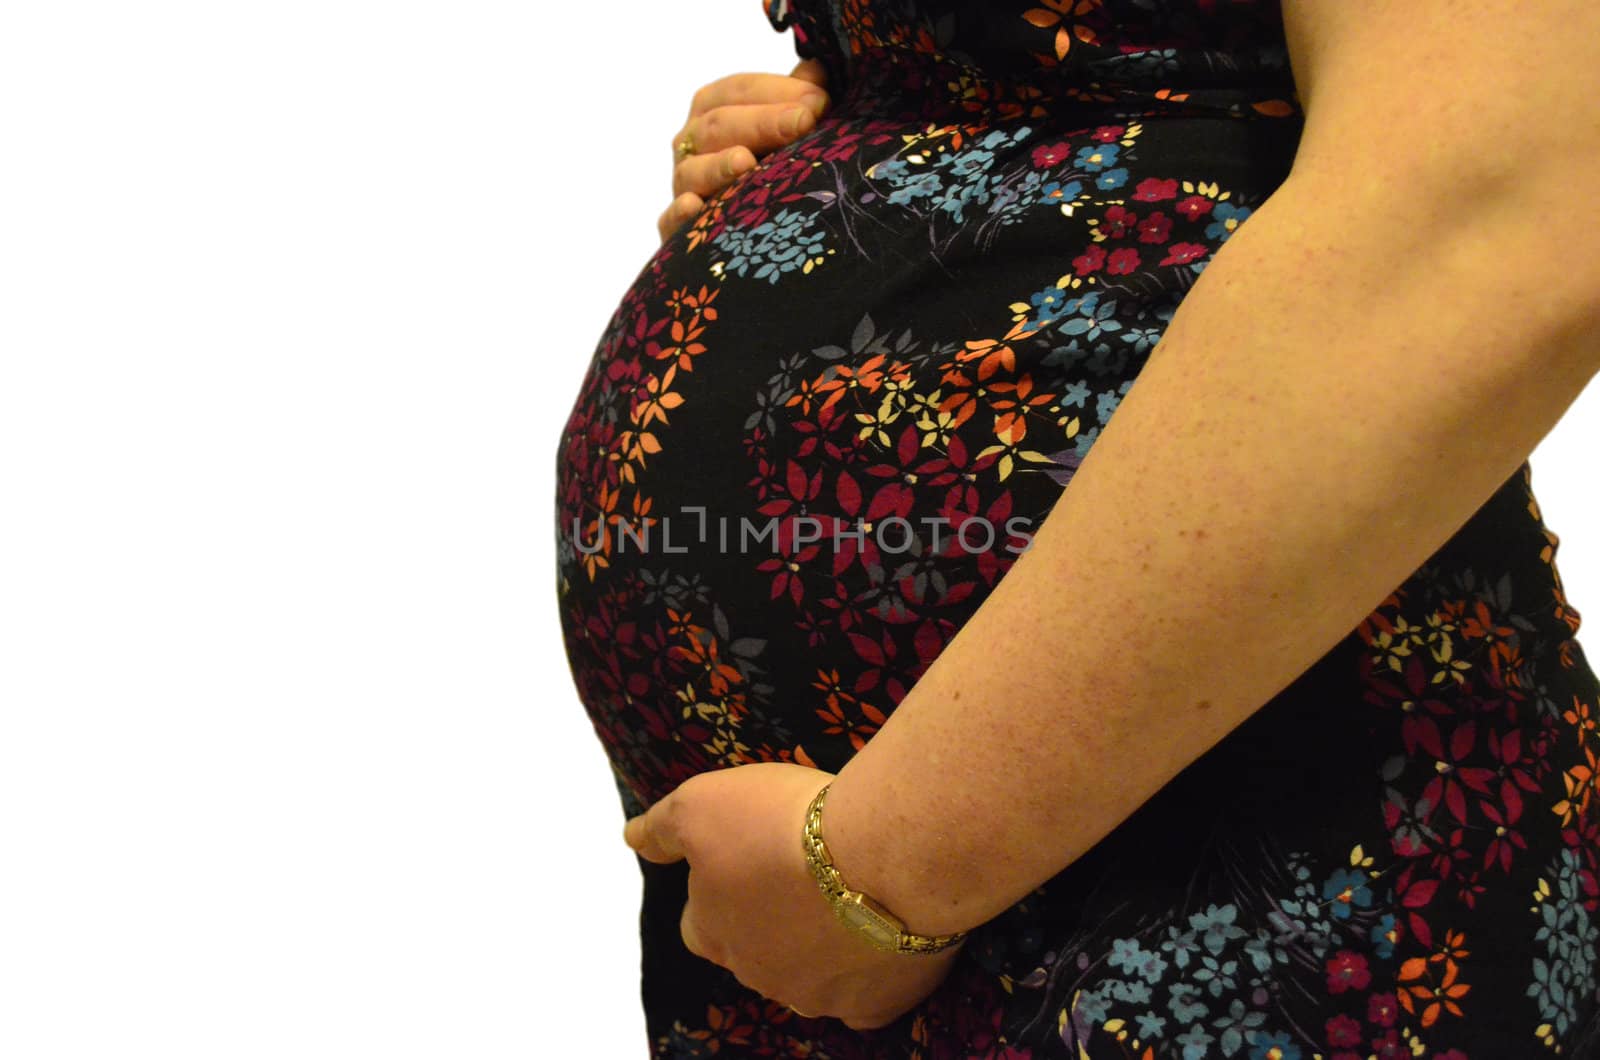 Isolated pregnant lady with colourful dress showing bump